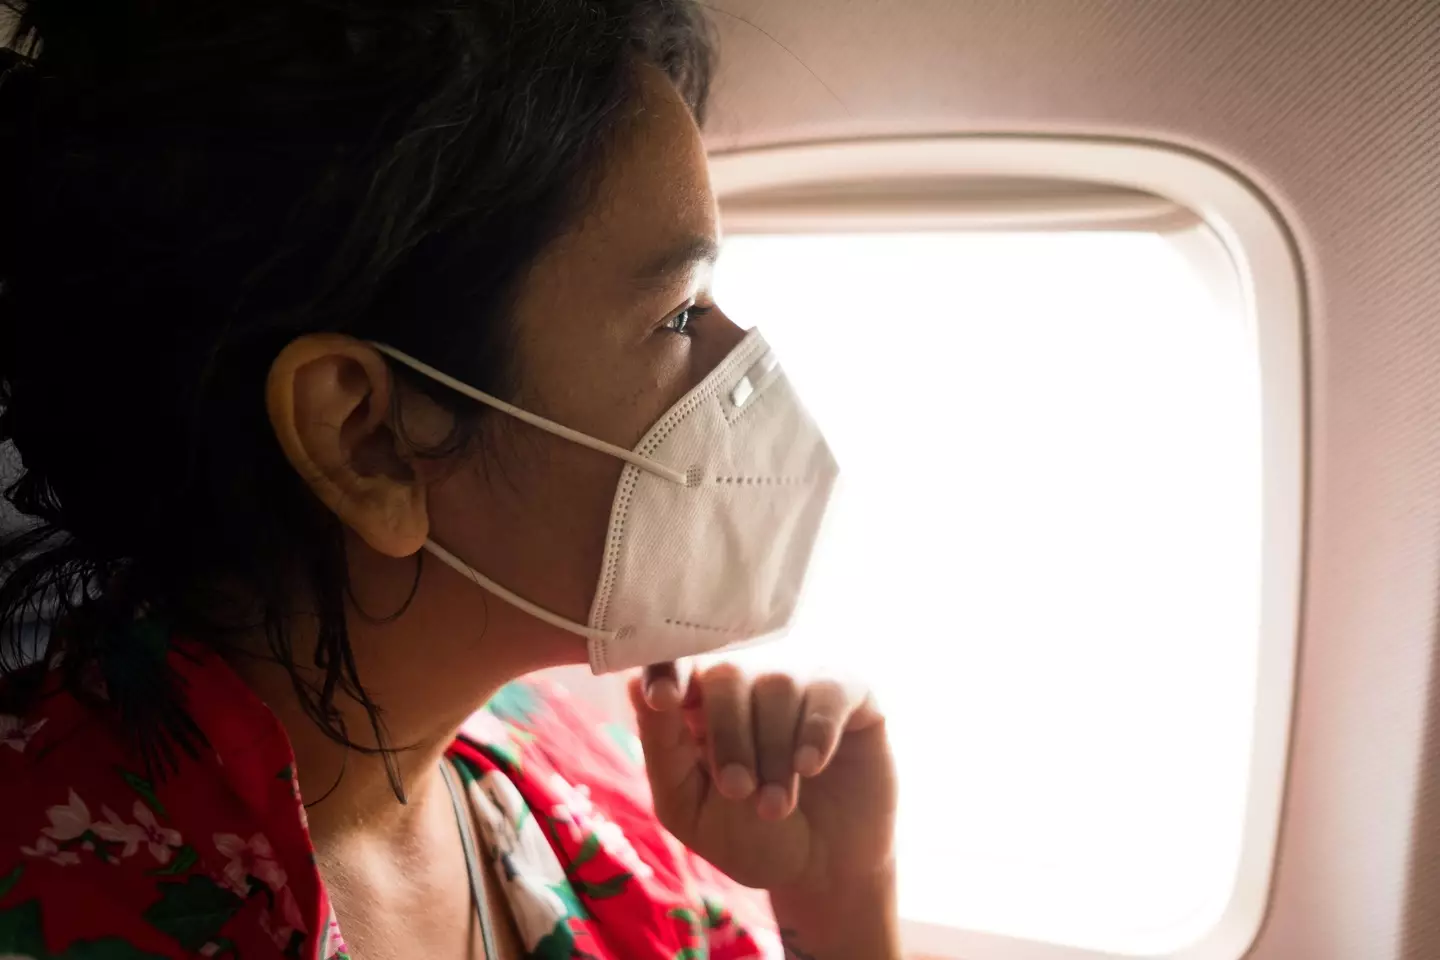 Longer-haul flights increase the risk of infection.